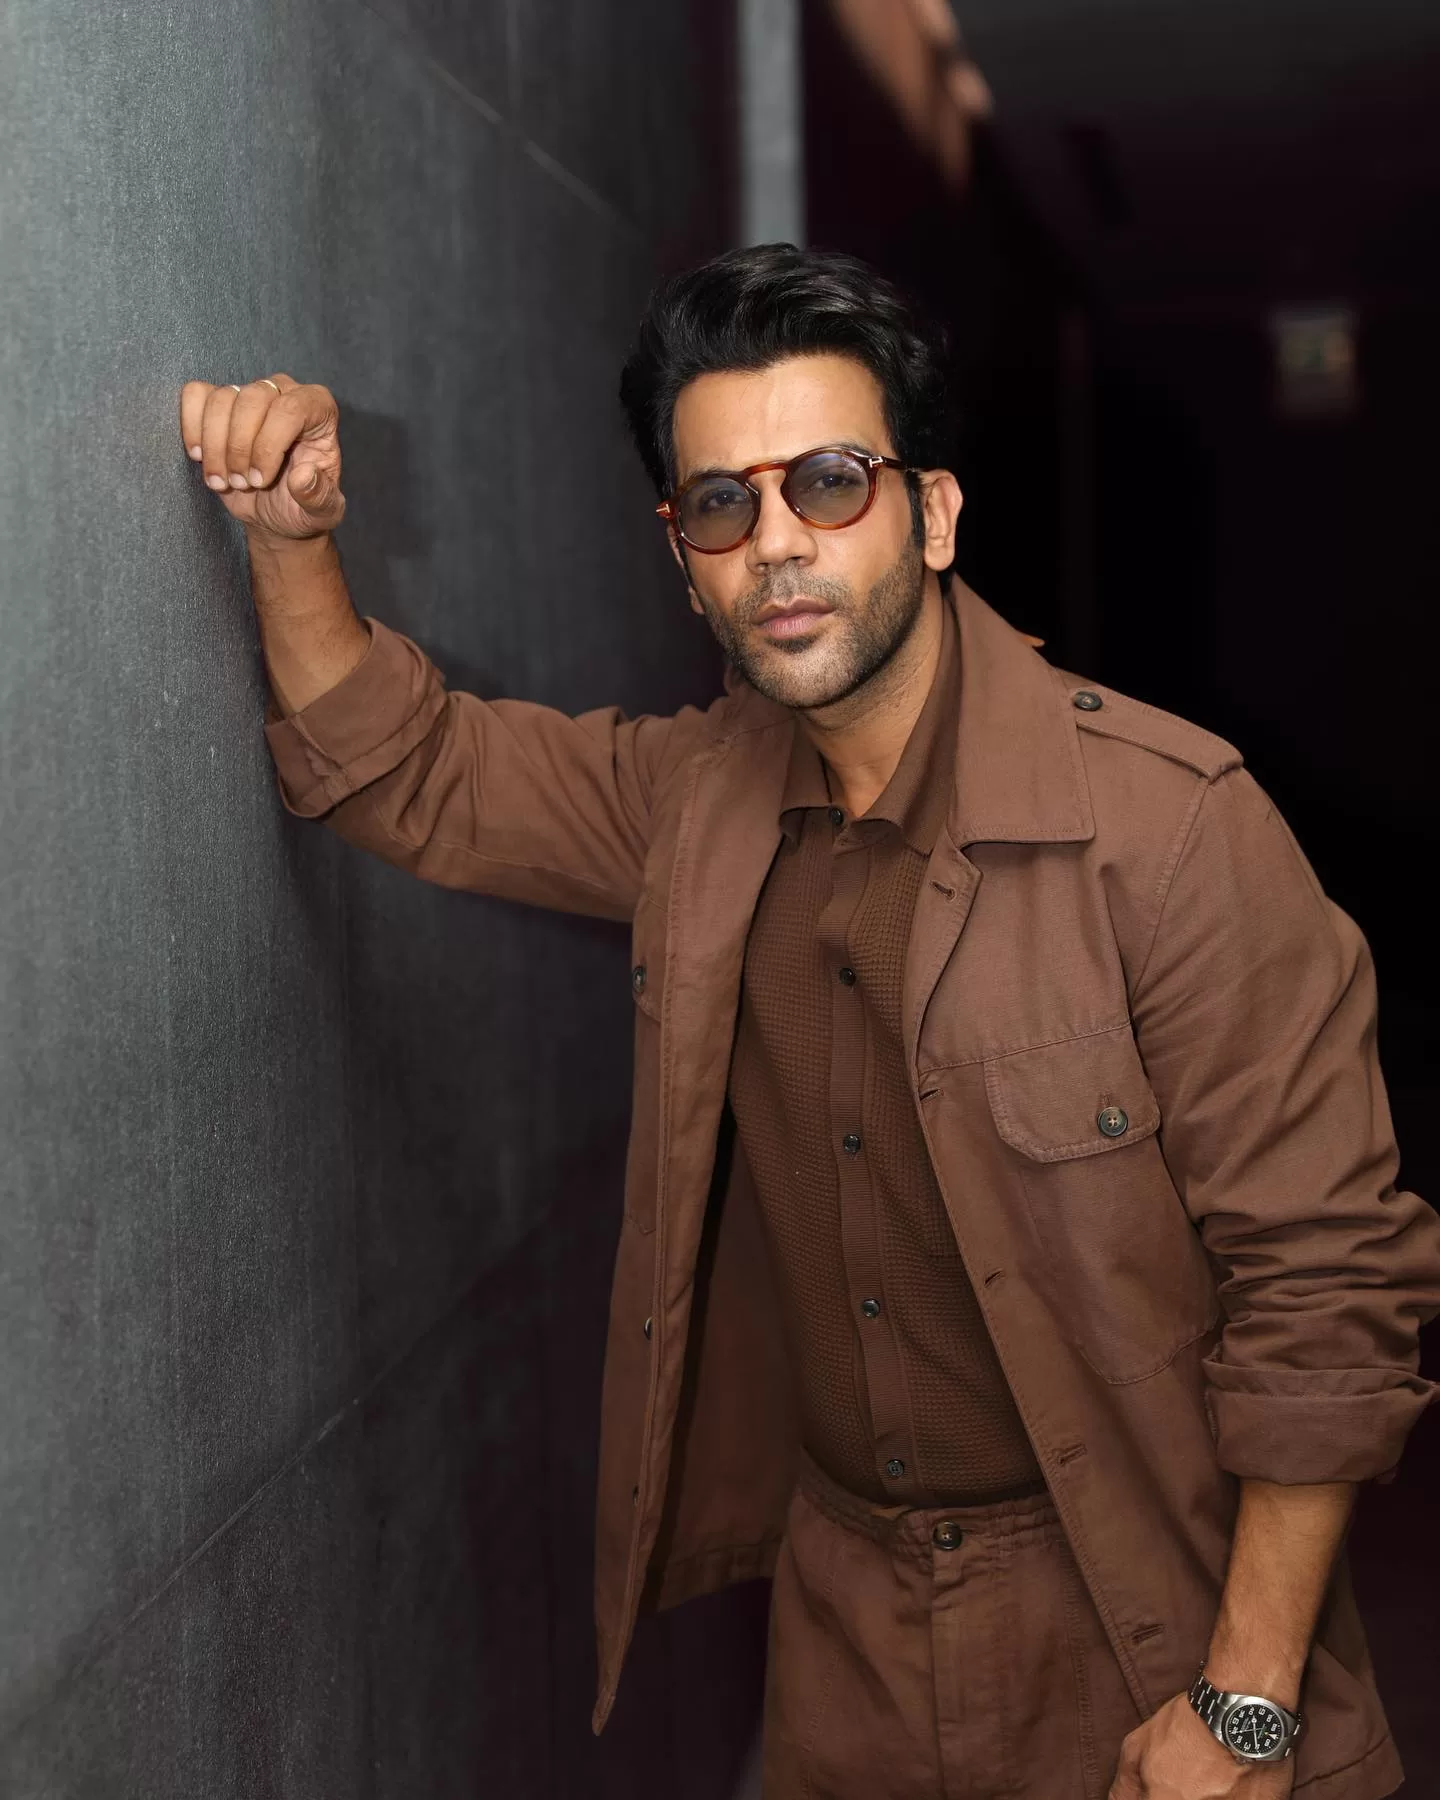 Photo by RajKummar Rao on May May be an image of one or more people wrist watch and sunglasses